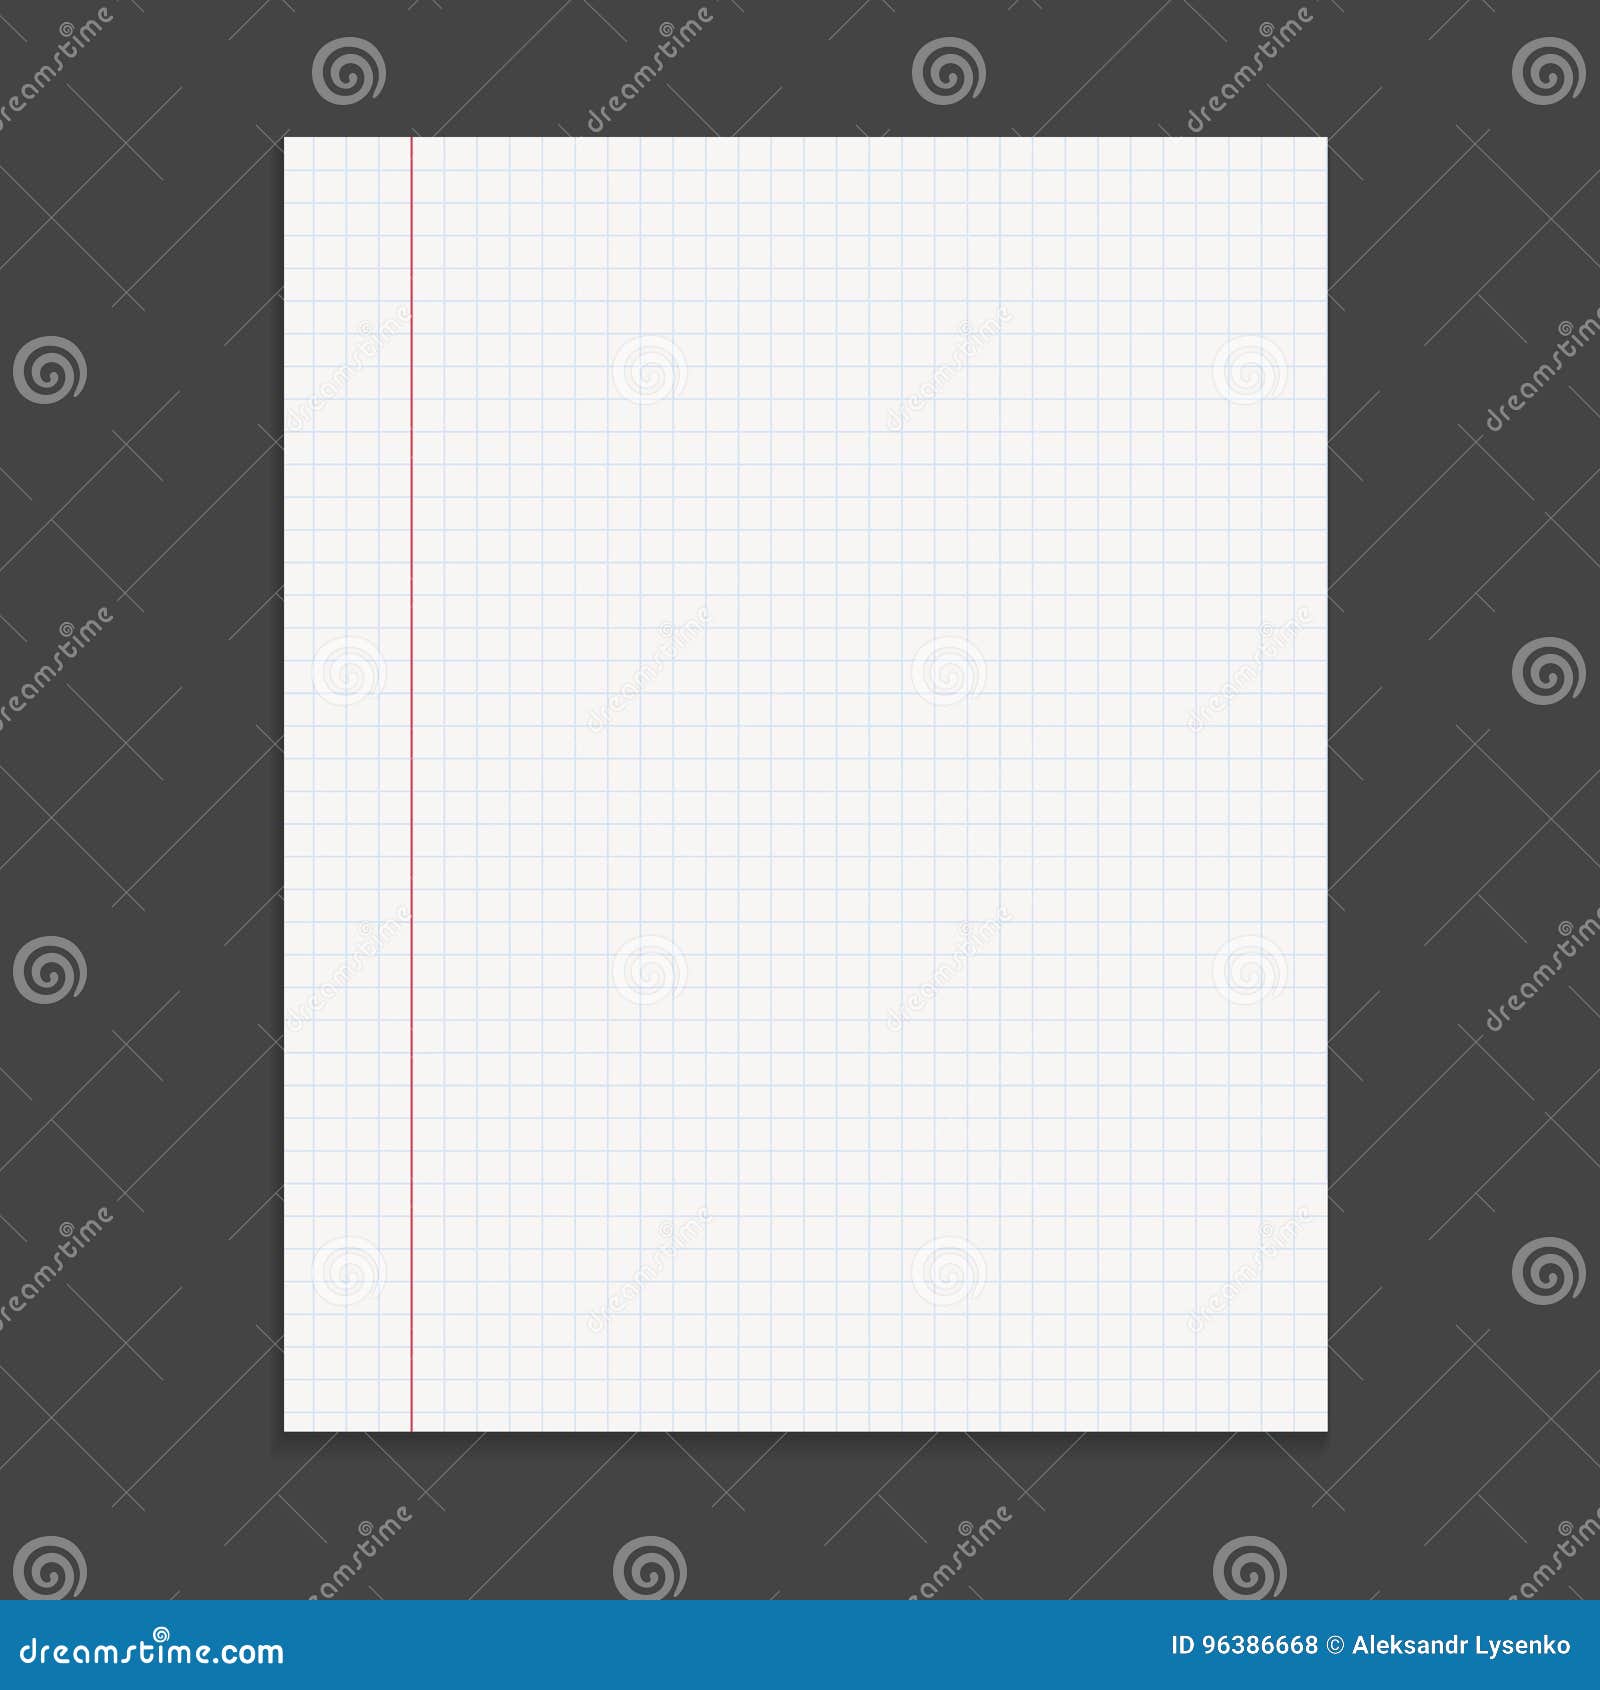 Realistic Blank Notebook Template For Cover Design School Business